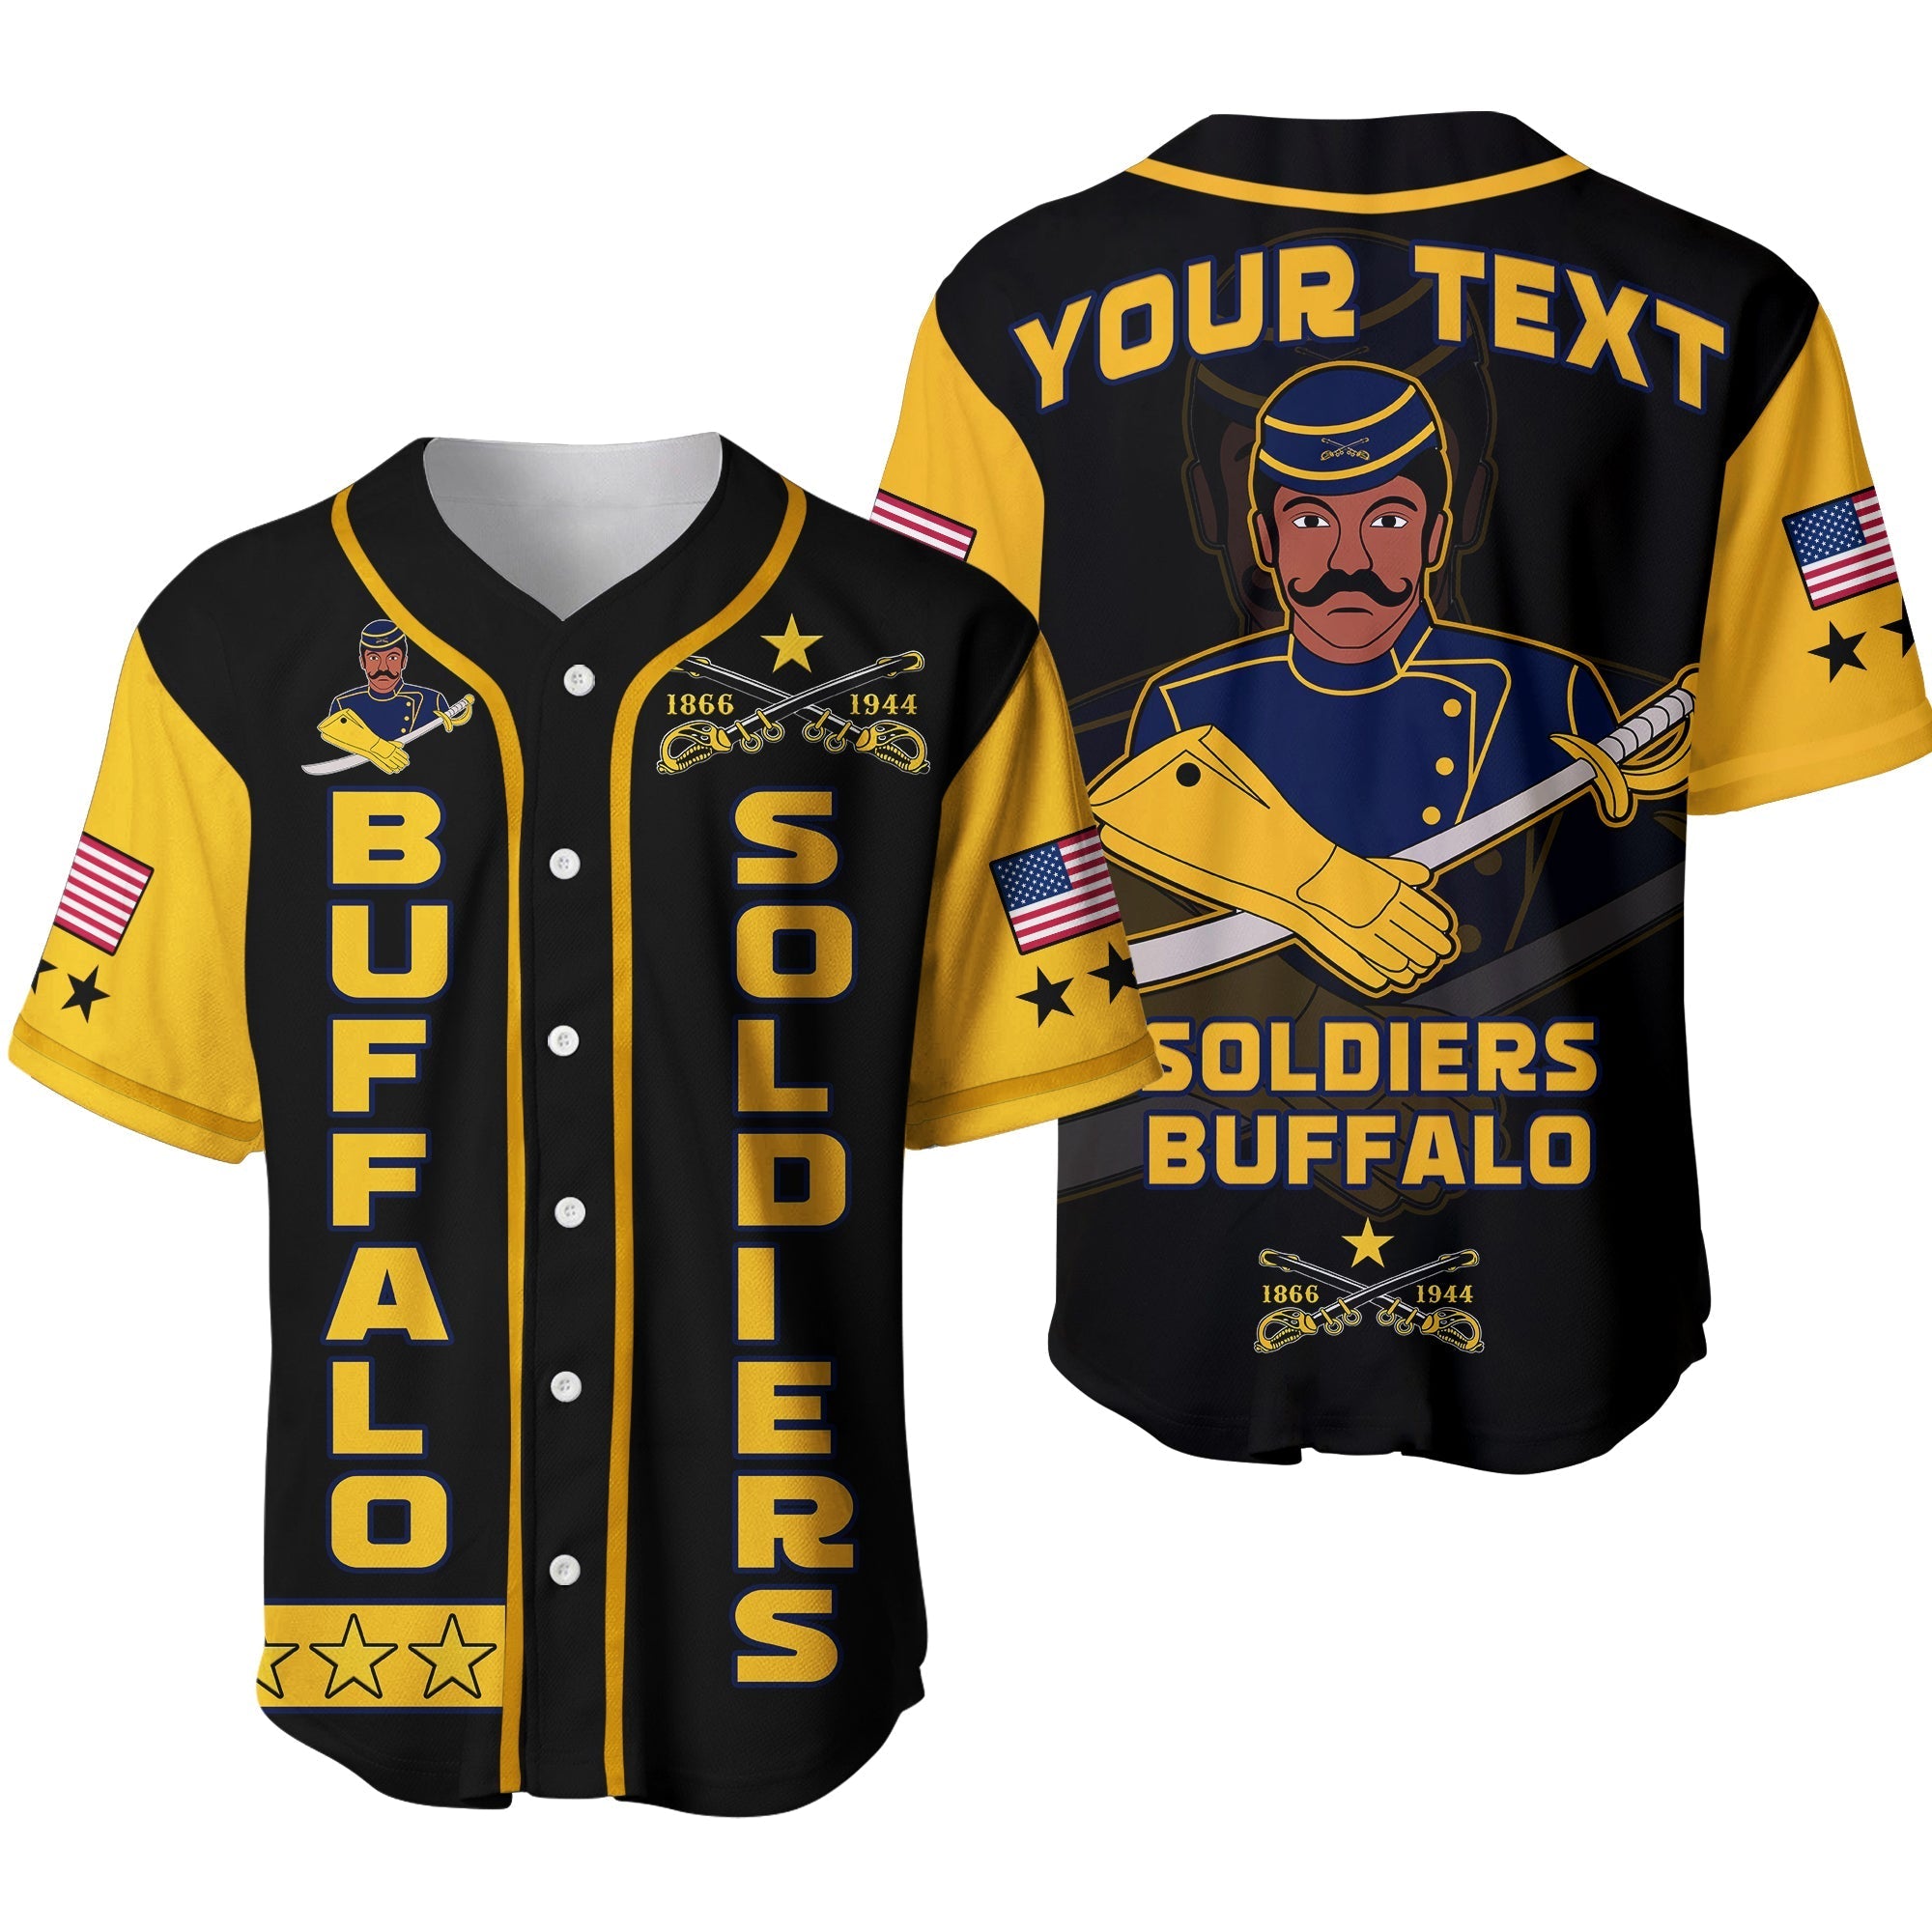 custom-personalised-buffalo-soldiers-baseball-jersey-bsmc-club-adore-motorcycle-ver02